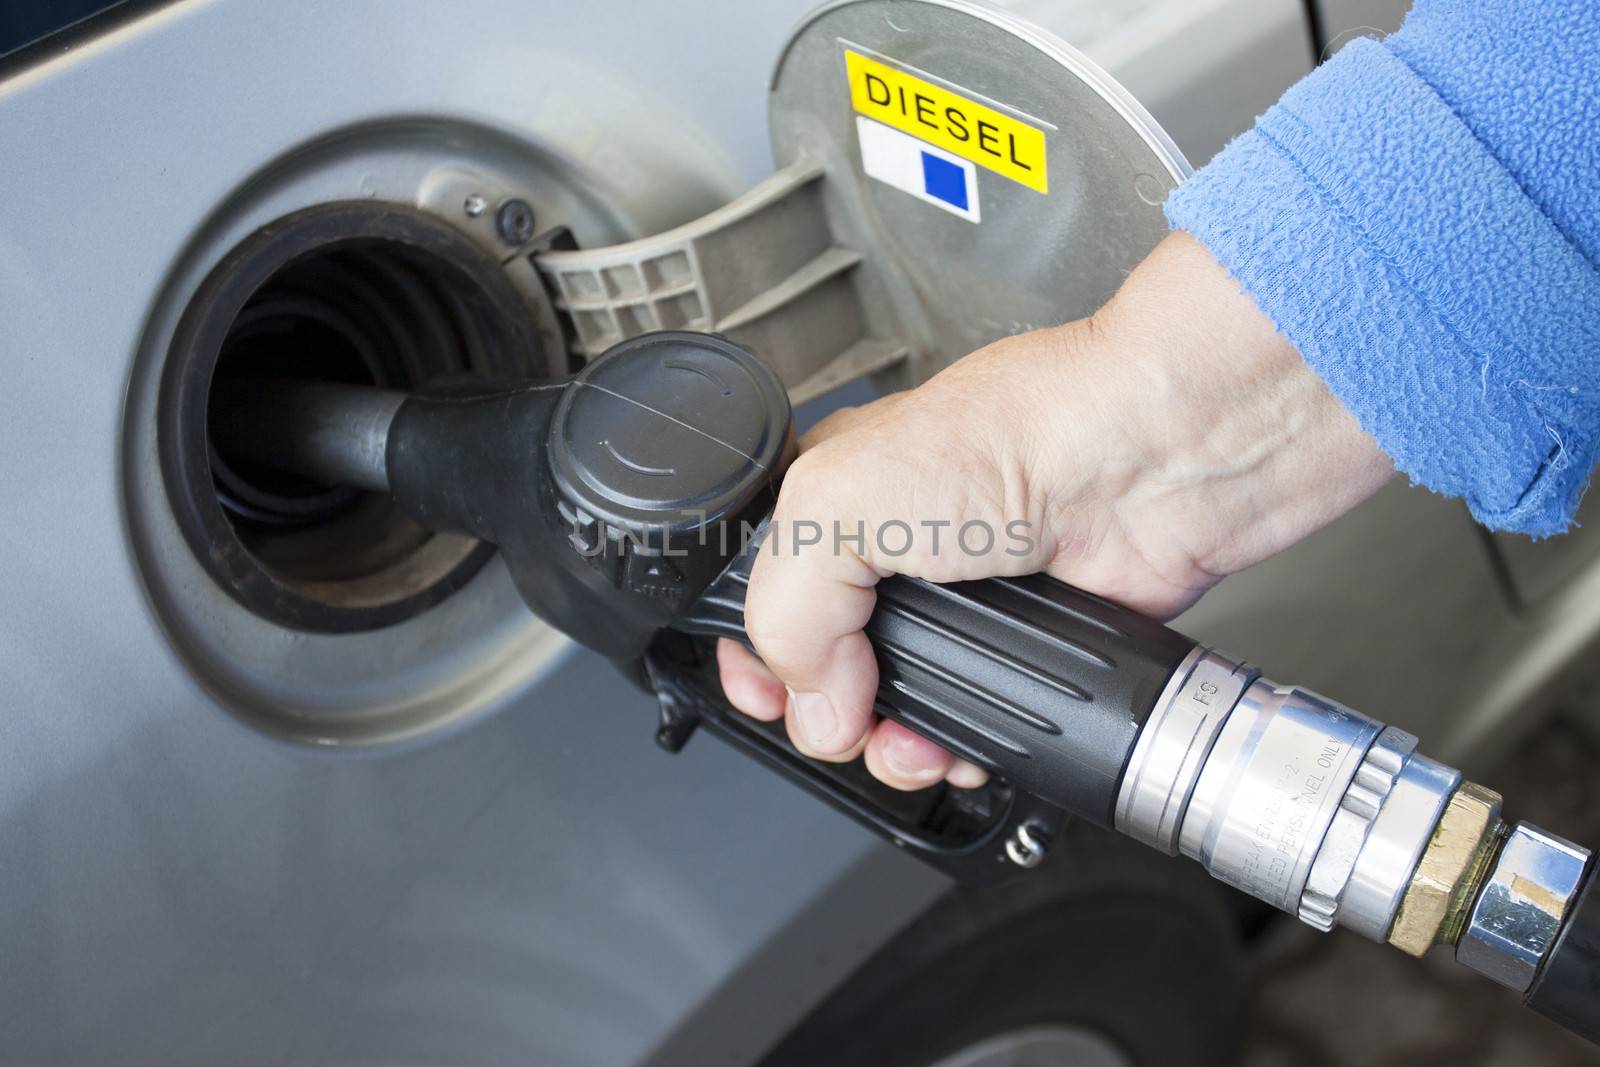 A hand filling up a car with diesel